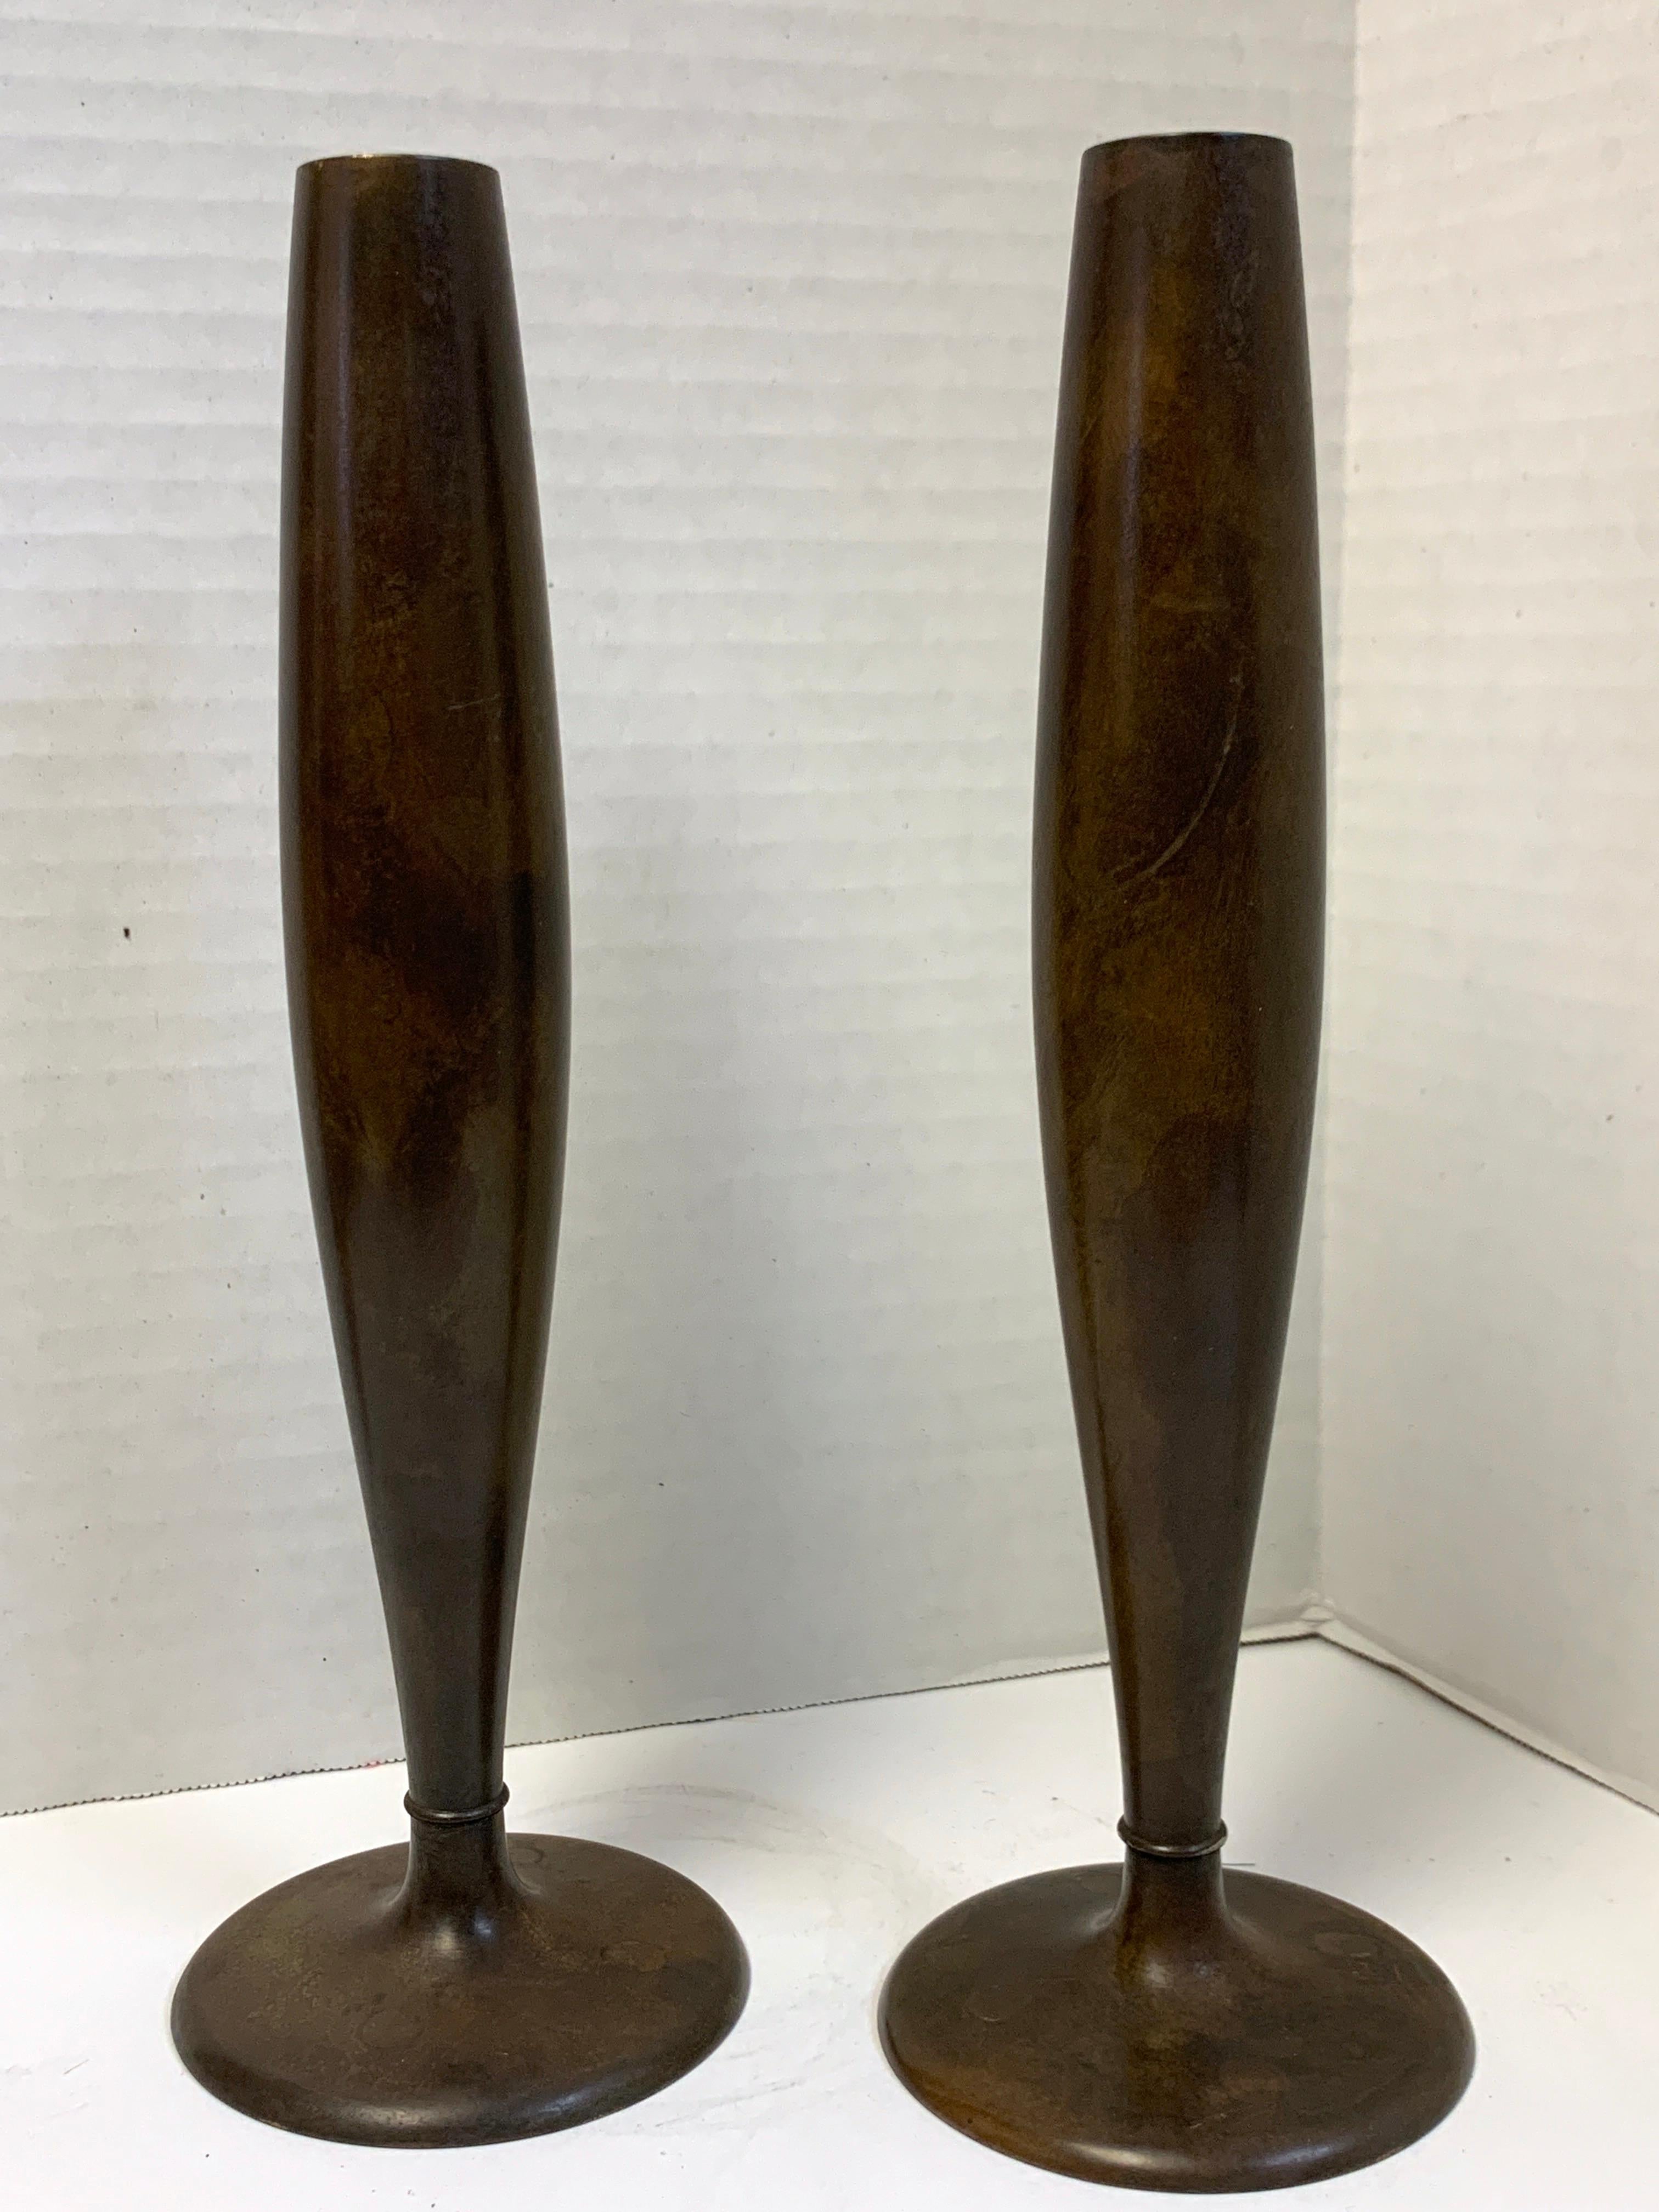 Pair of tapered bronze vases, by Tiffany Studios, New York, each one stamped Tiffany Studios, New York.